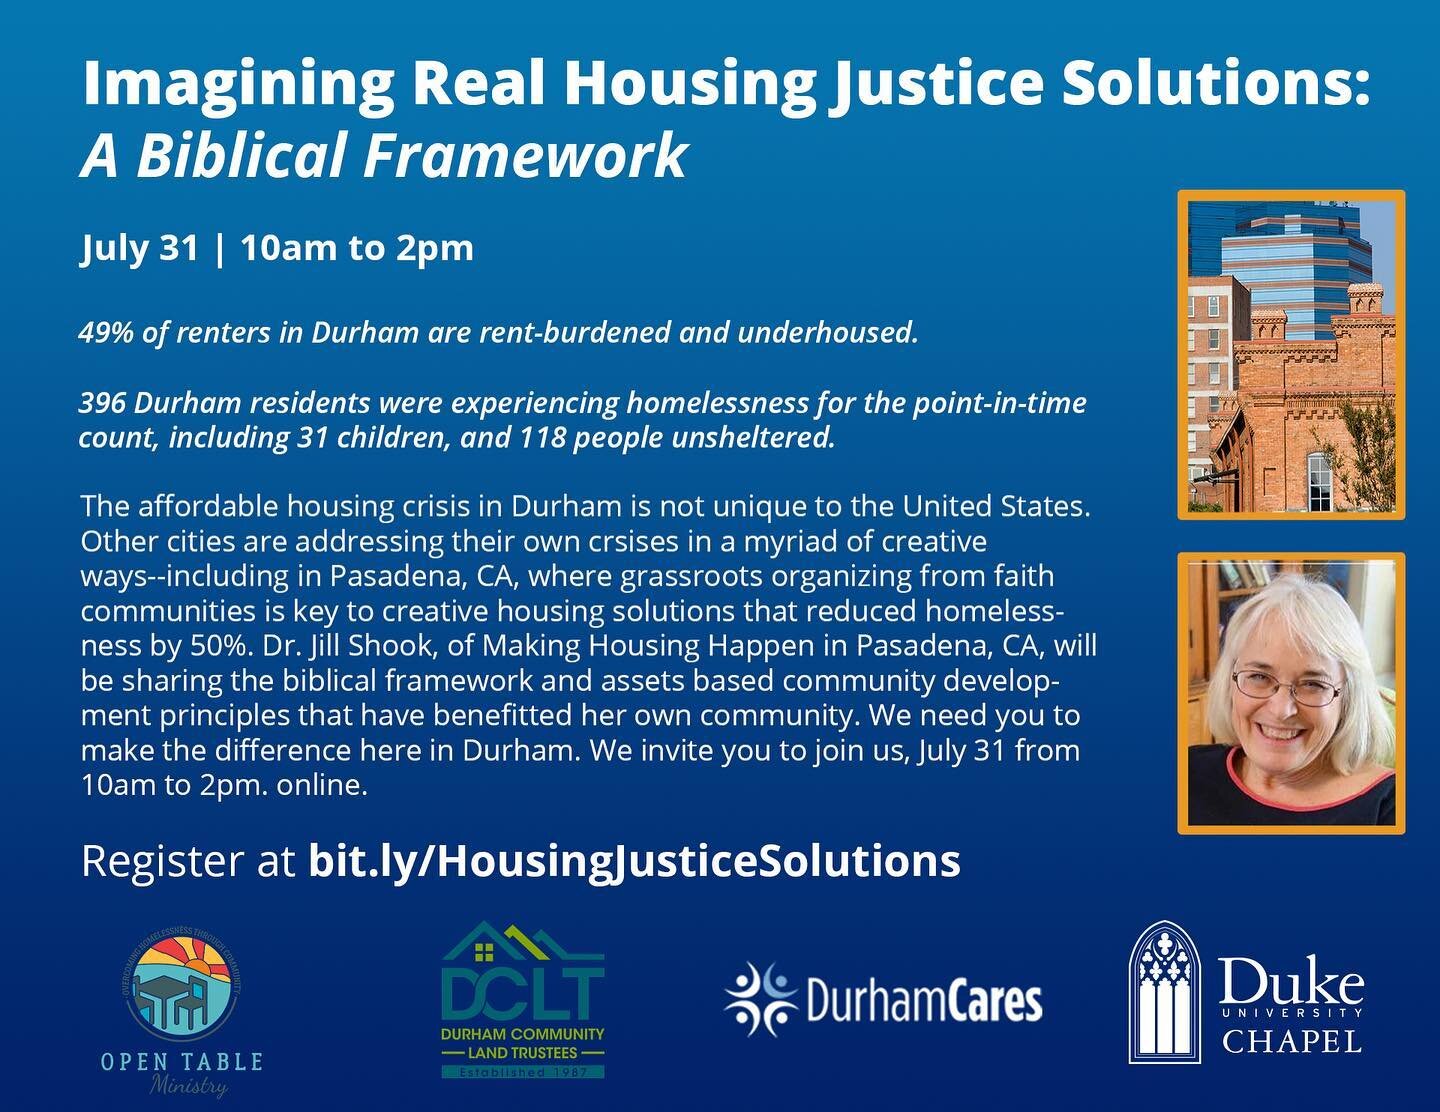 We are excited to co-sponsor this upcoming virtual conversation! We hope you will join us on July 31 as learn more about supporting affordable housing initiatives in our local community. Register at bit.ly/HousingJusticeSolutions